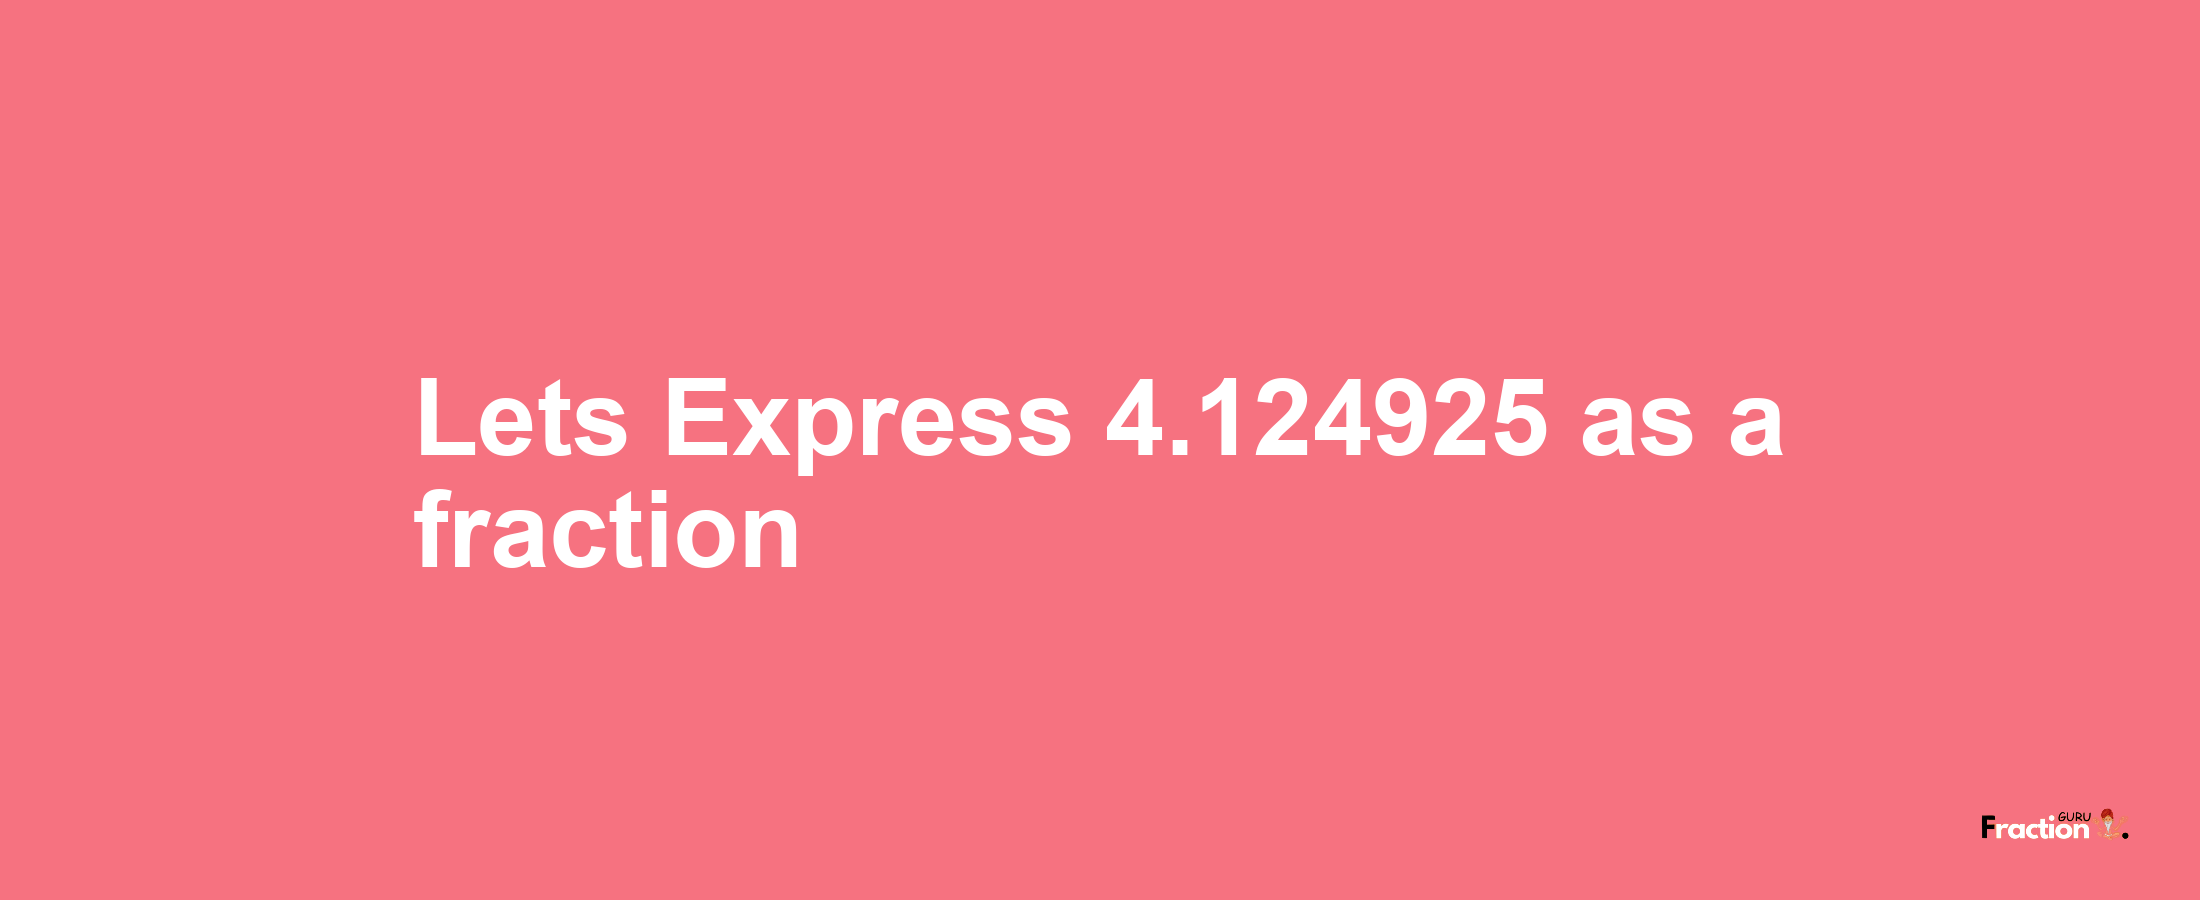 Lets Express 4.124925 as afraction